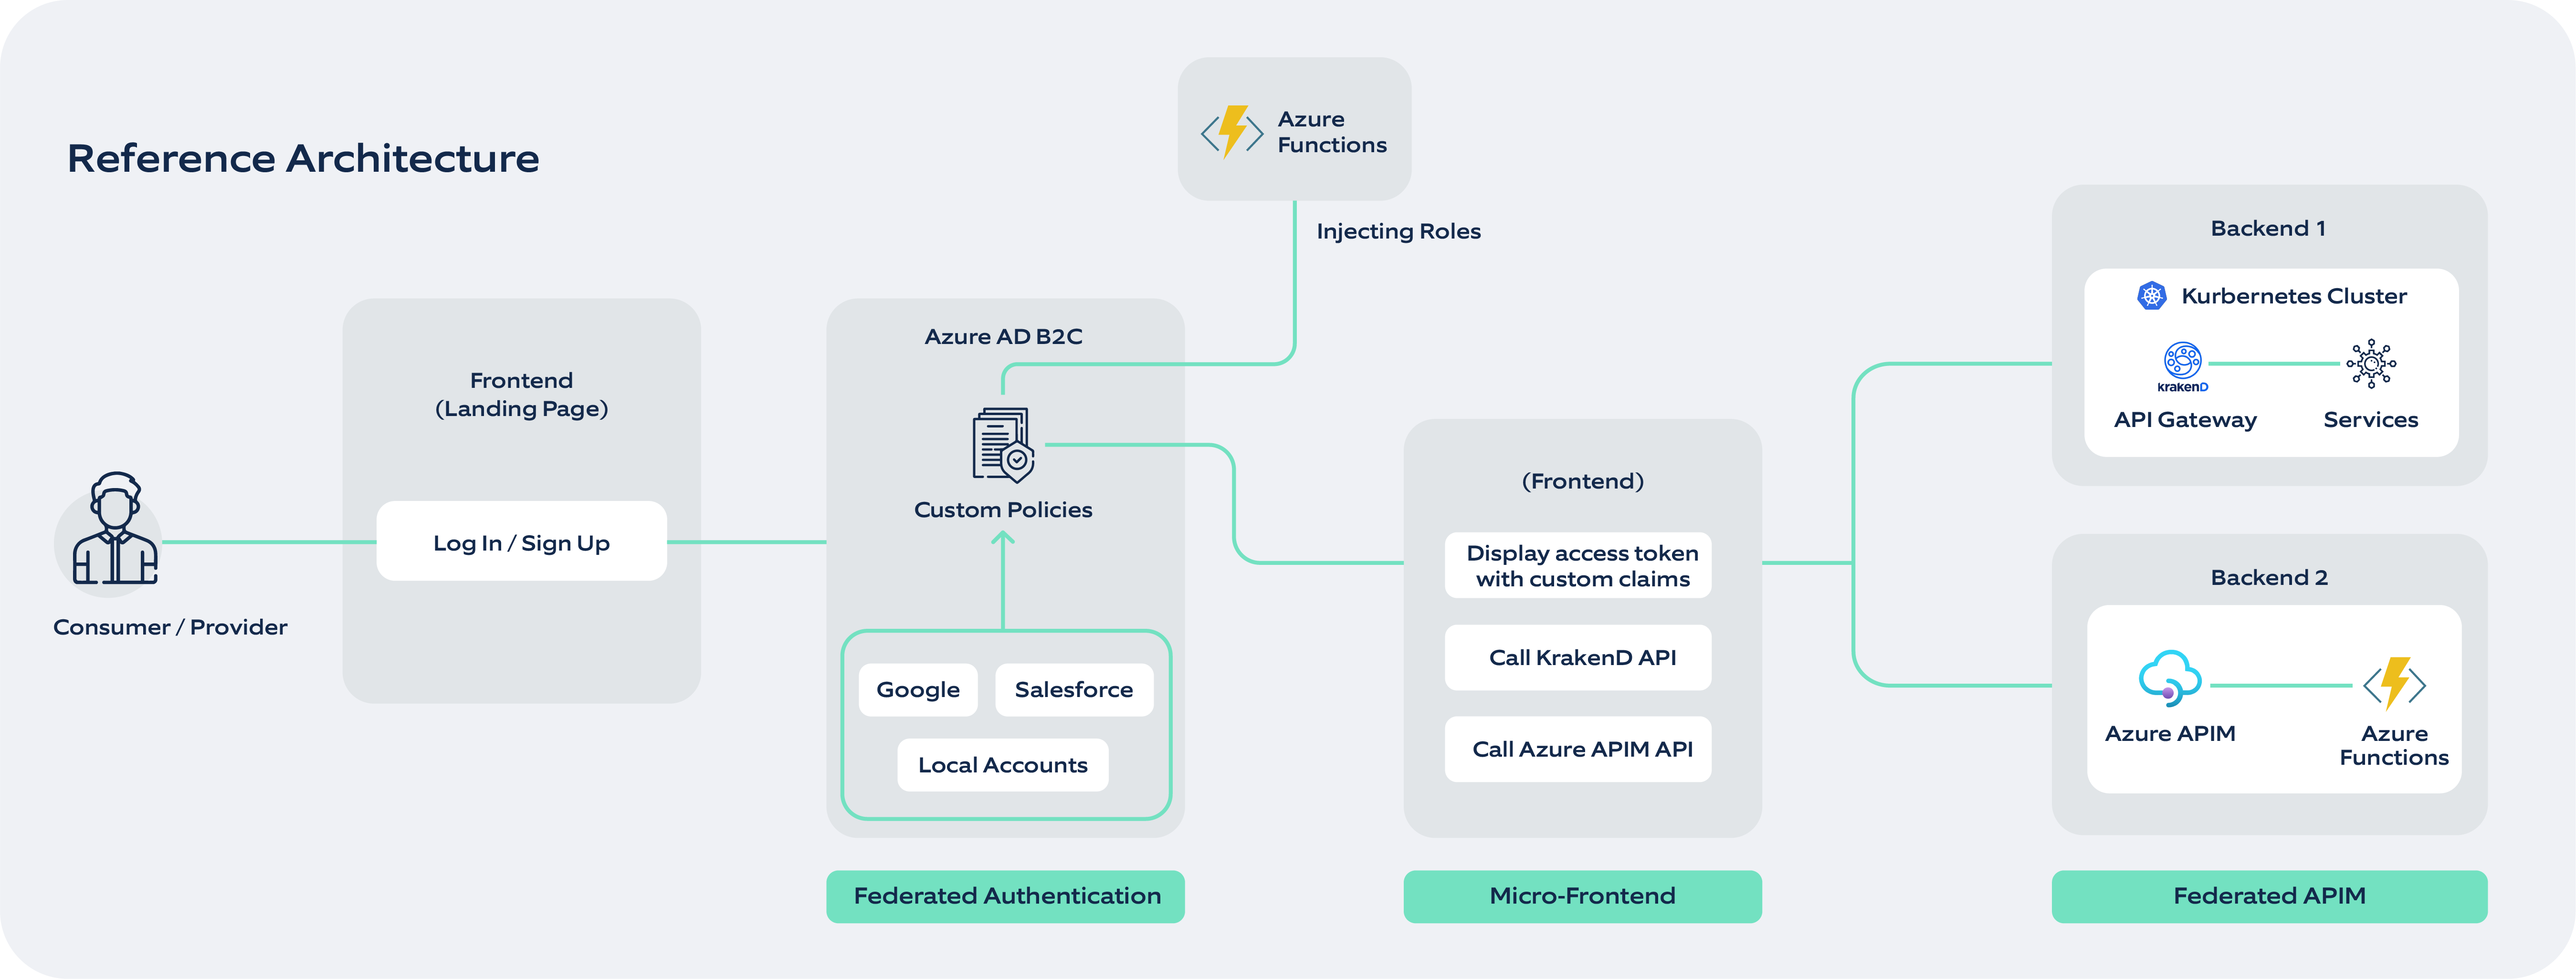 how API Gateway and API Management can fully unleash the potential of federated architecture